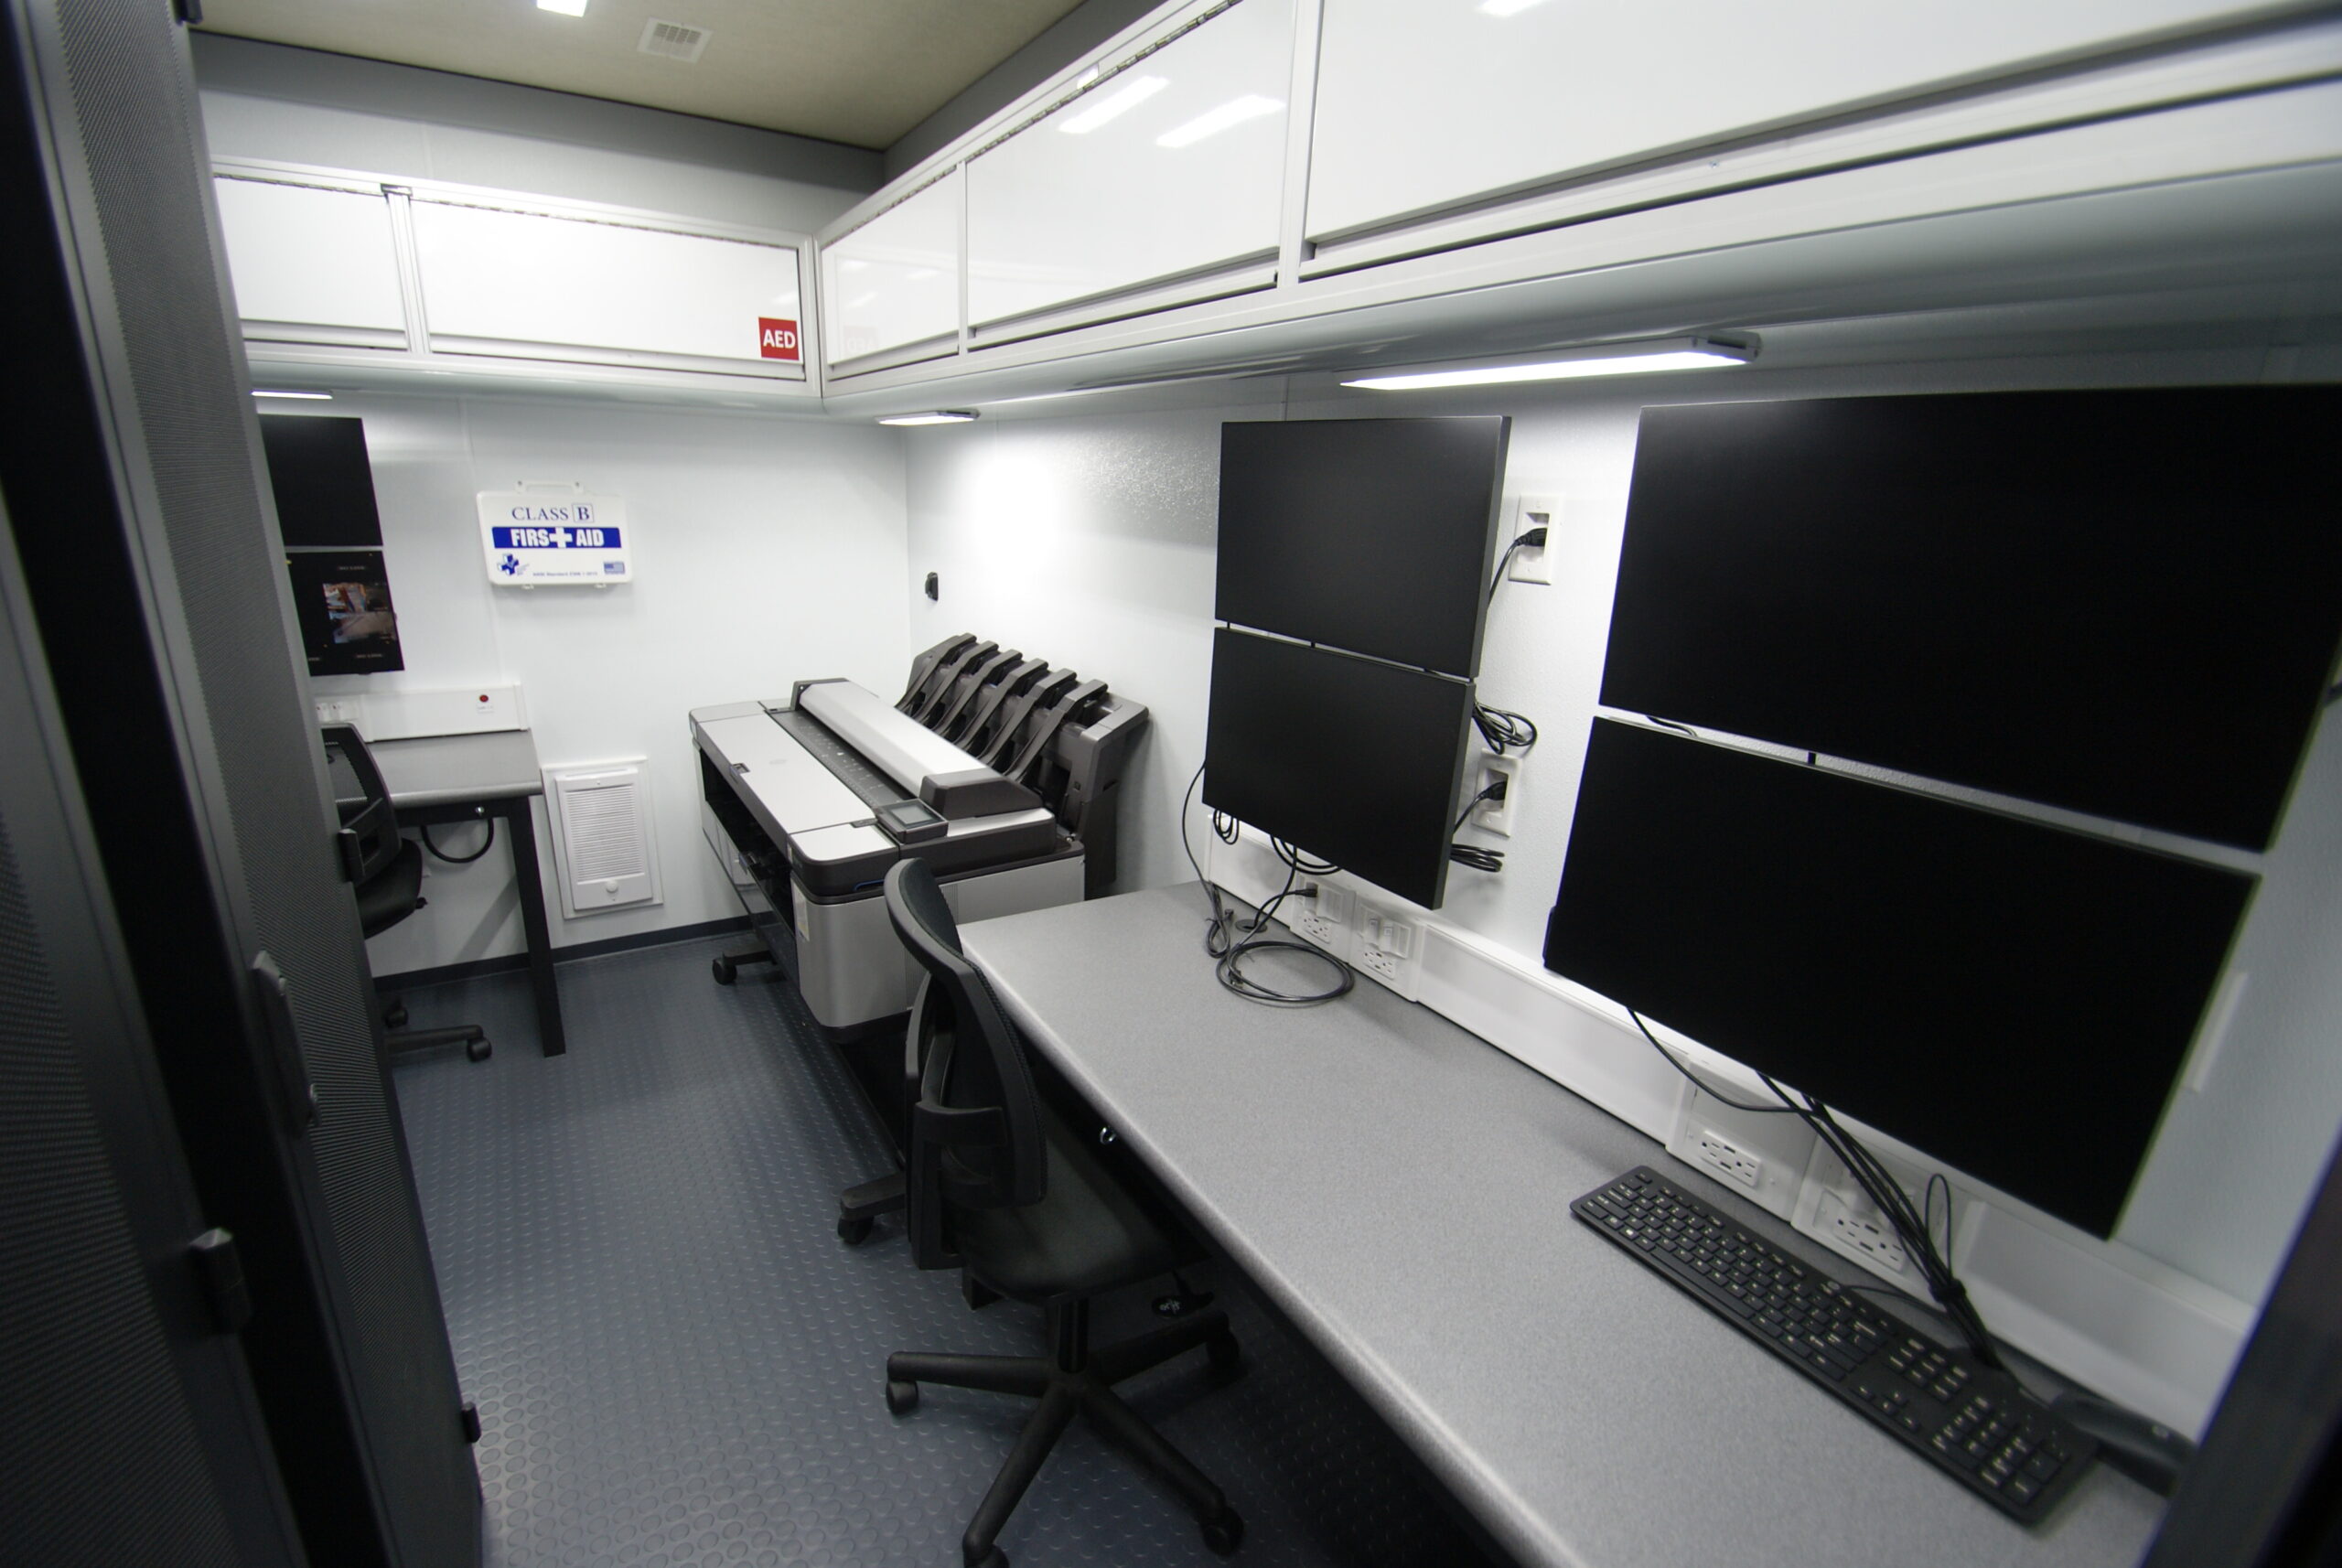 An alternate view of the third room in Westmoreland County Public Safety's unit. Additional workspace and electronics rack cabinet are pictured.